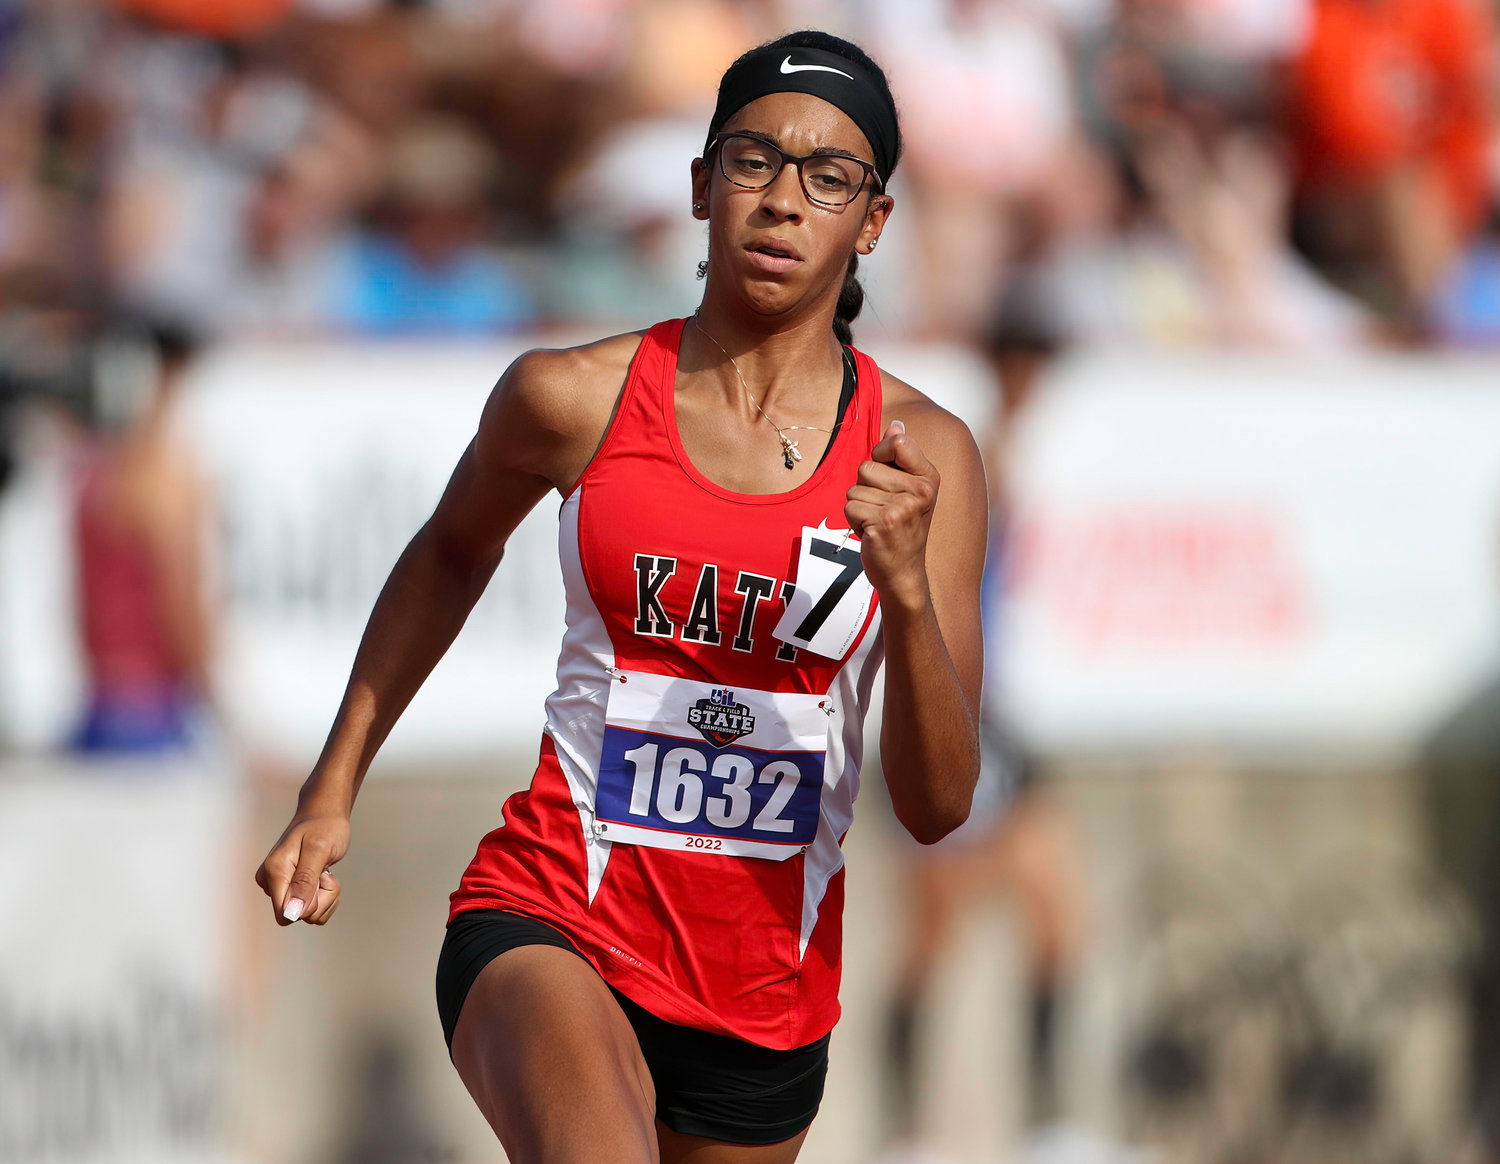 Sarah Pantophlet of Katy High School runs in the Class 6A girls 800-meter run at the UIL State Track and Field Meet on May 14, 2022 in Austin, Texas.